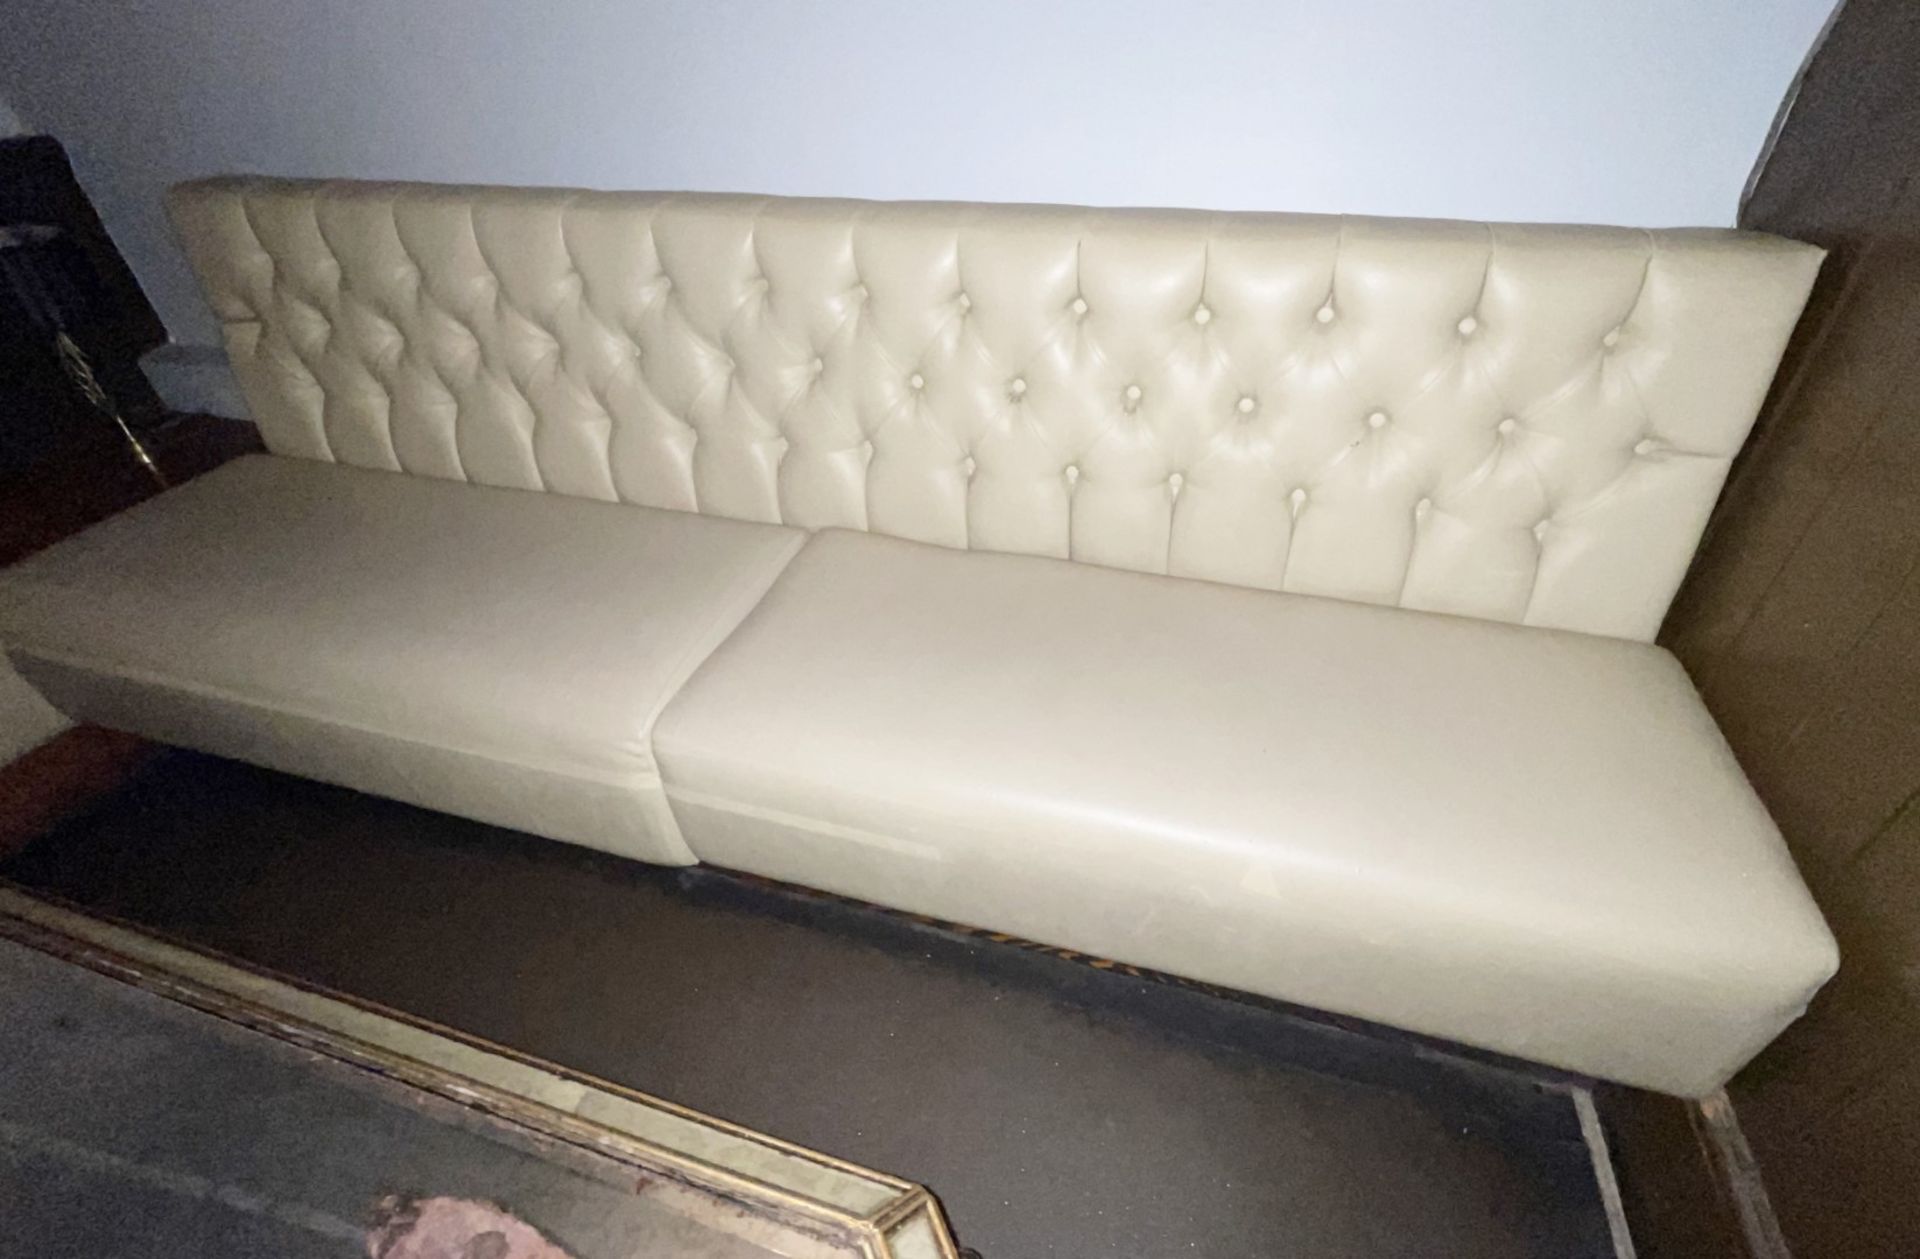 5 x Sections of Commercial Button Back Banquette Booth Seating Upholstered in a Cream Faux Leather - Image 7 of 14